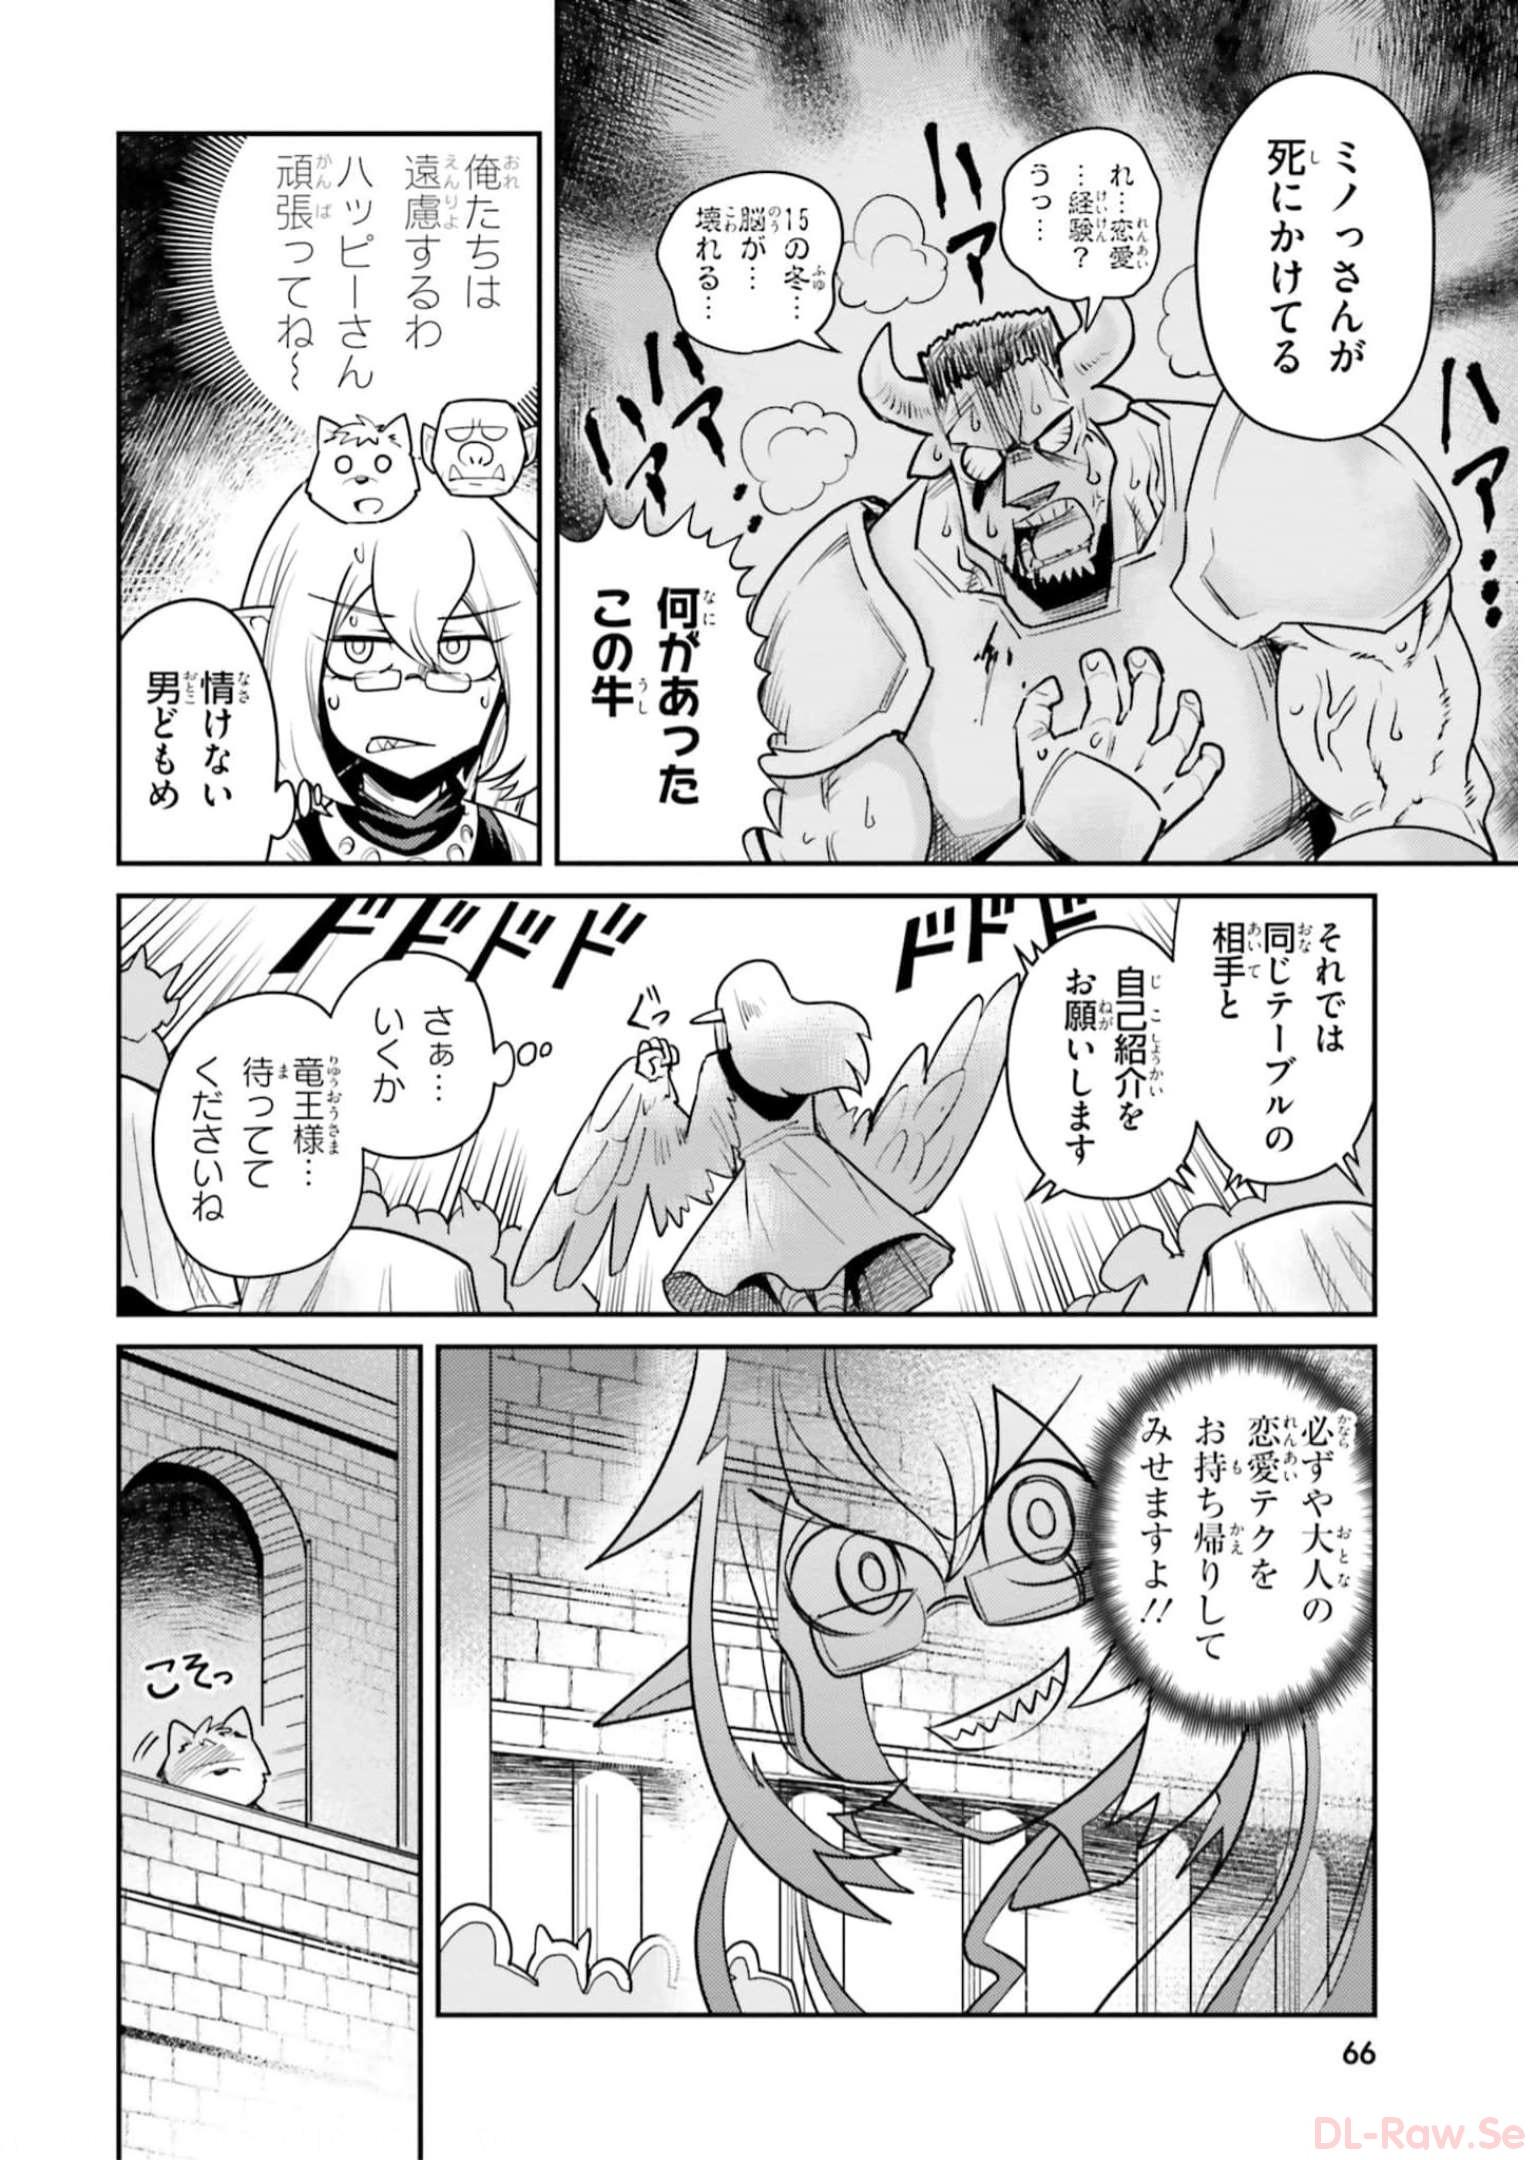 Dungeon Friends Forever Dungeon's Childhood Friend ダンジョンの幼なじみ 第14話 - Page 4